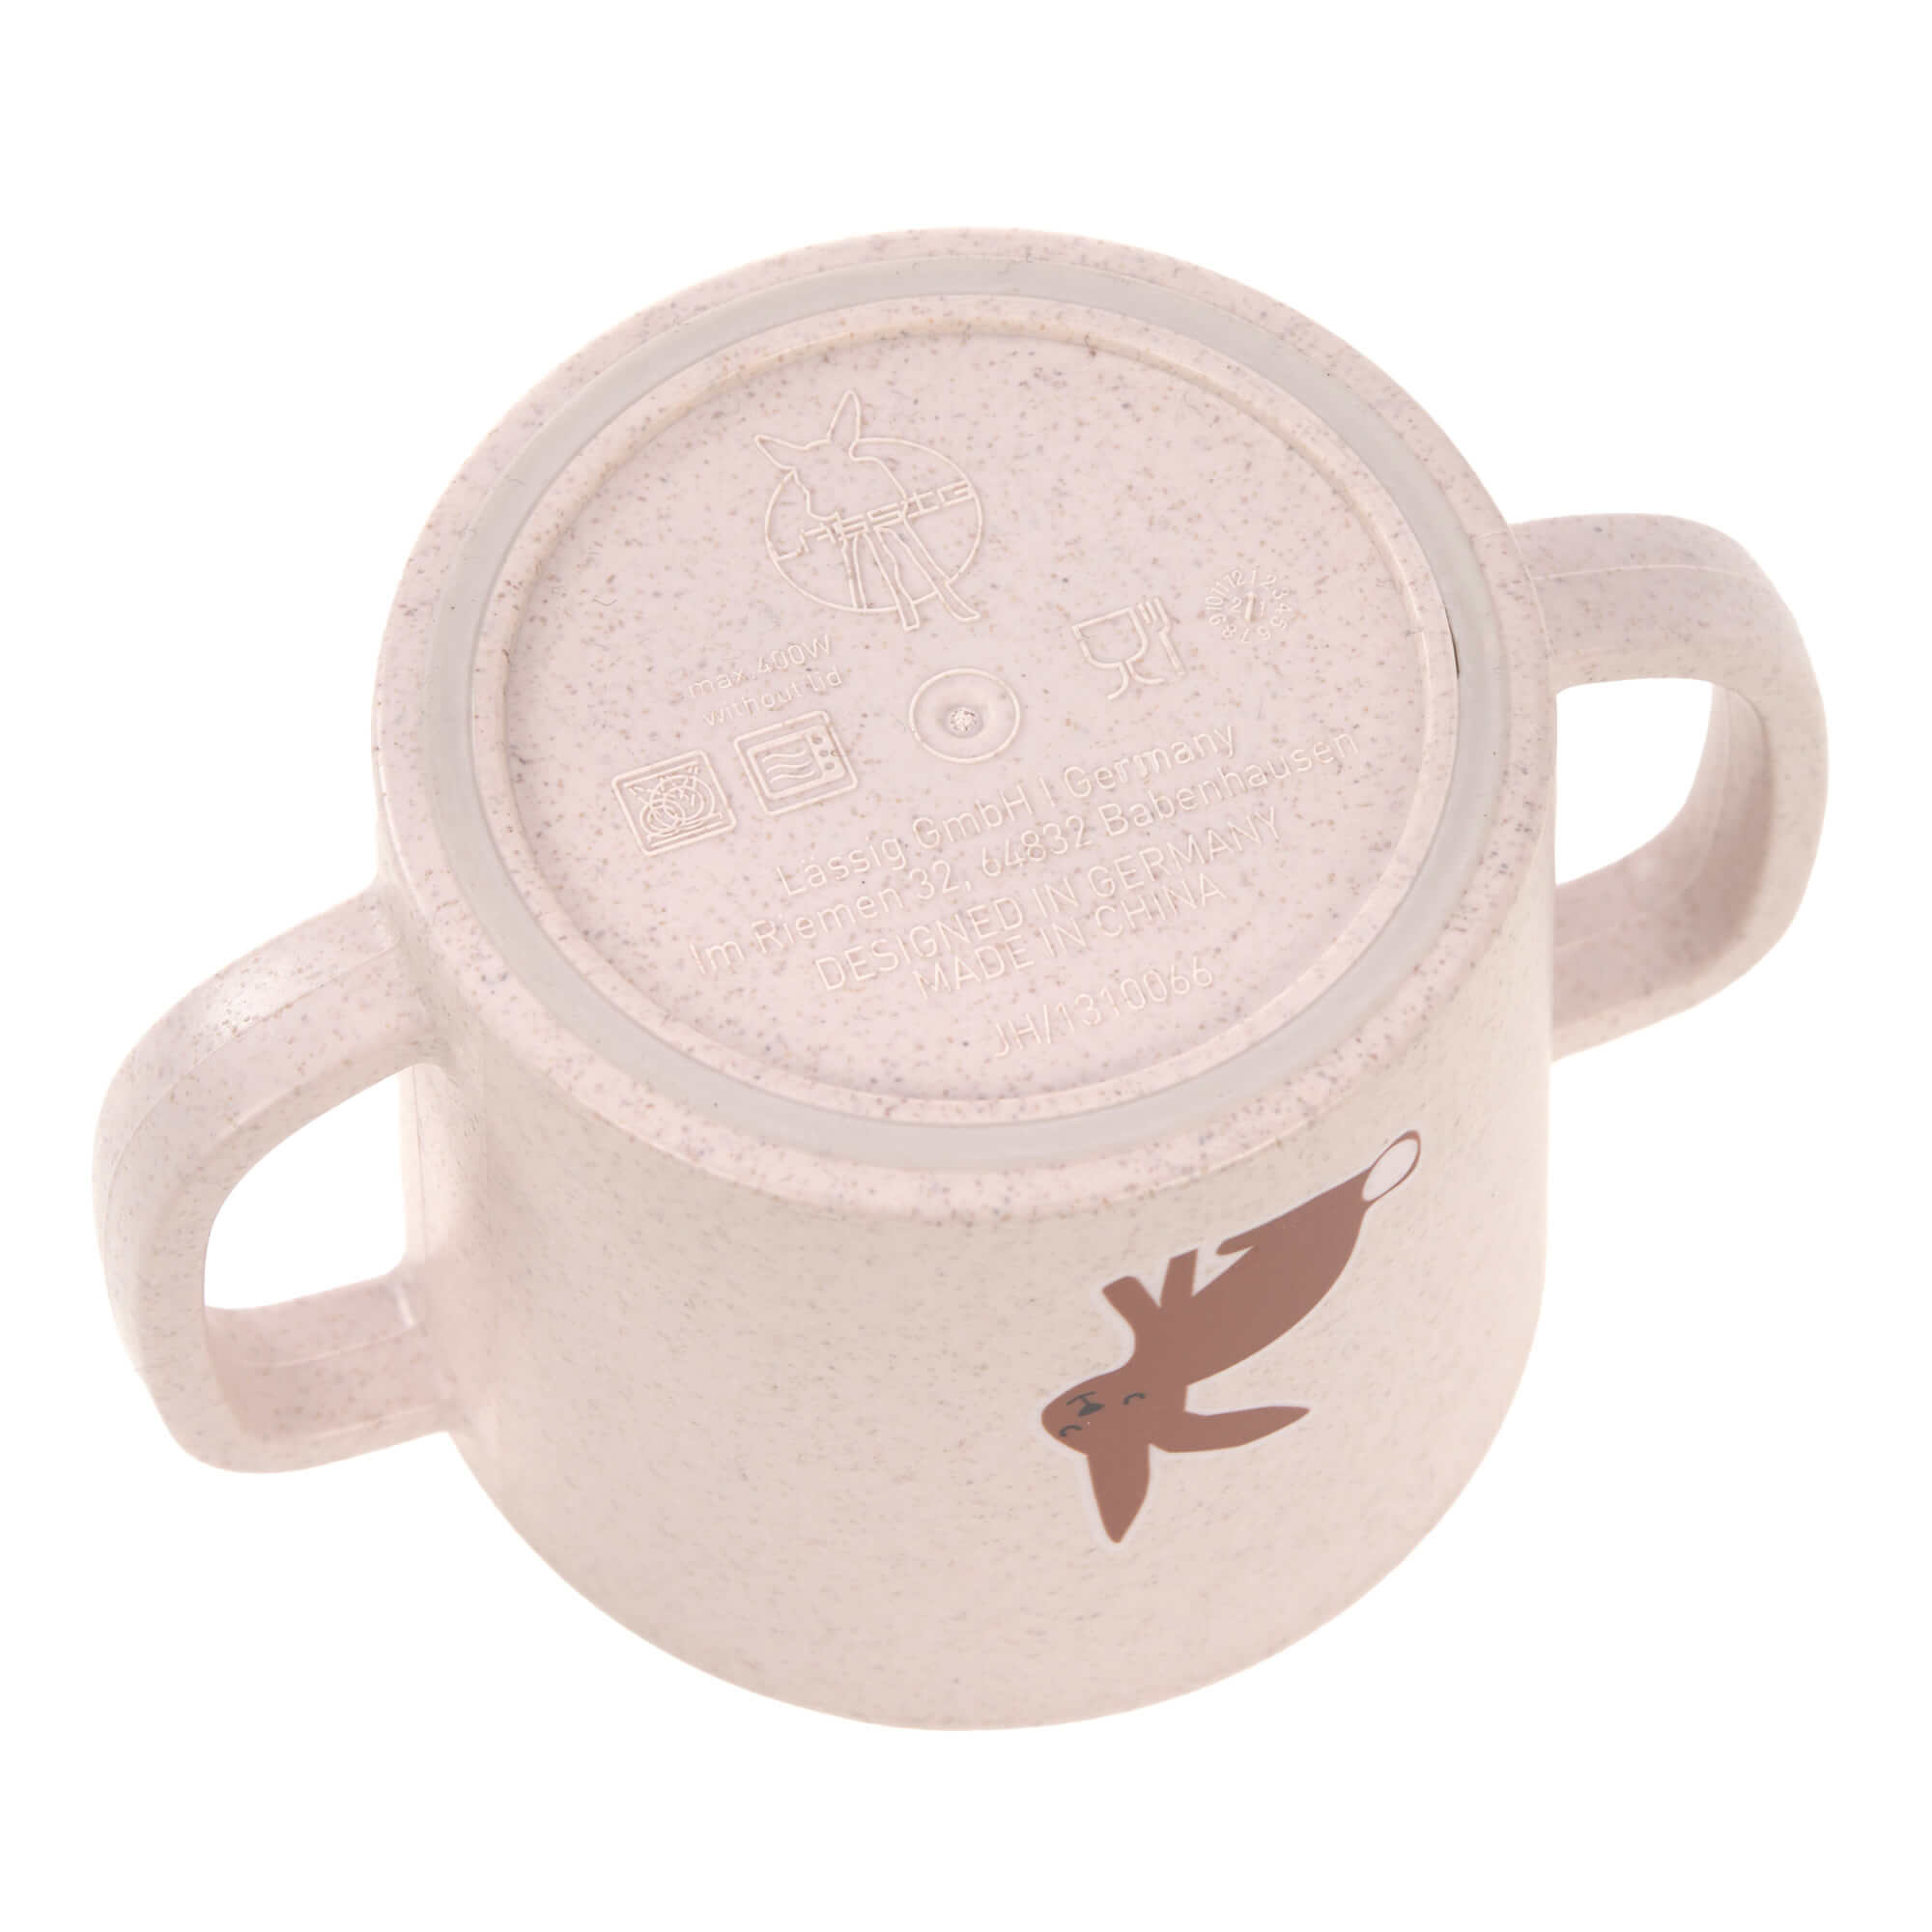 LÄSSIG Bamboo Sippy Cup - Little Forest Rabbit 3